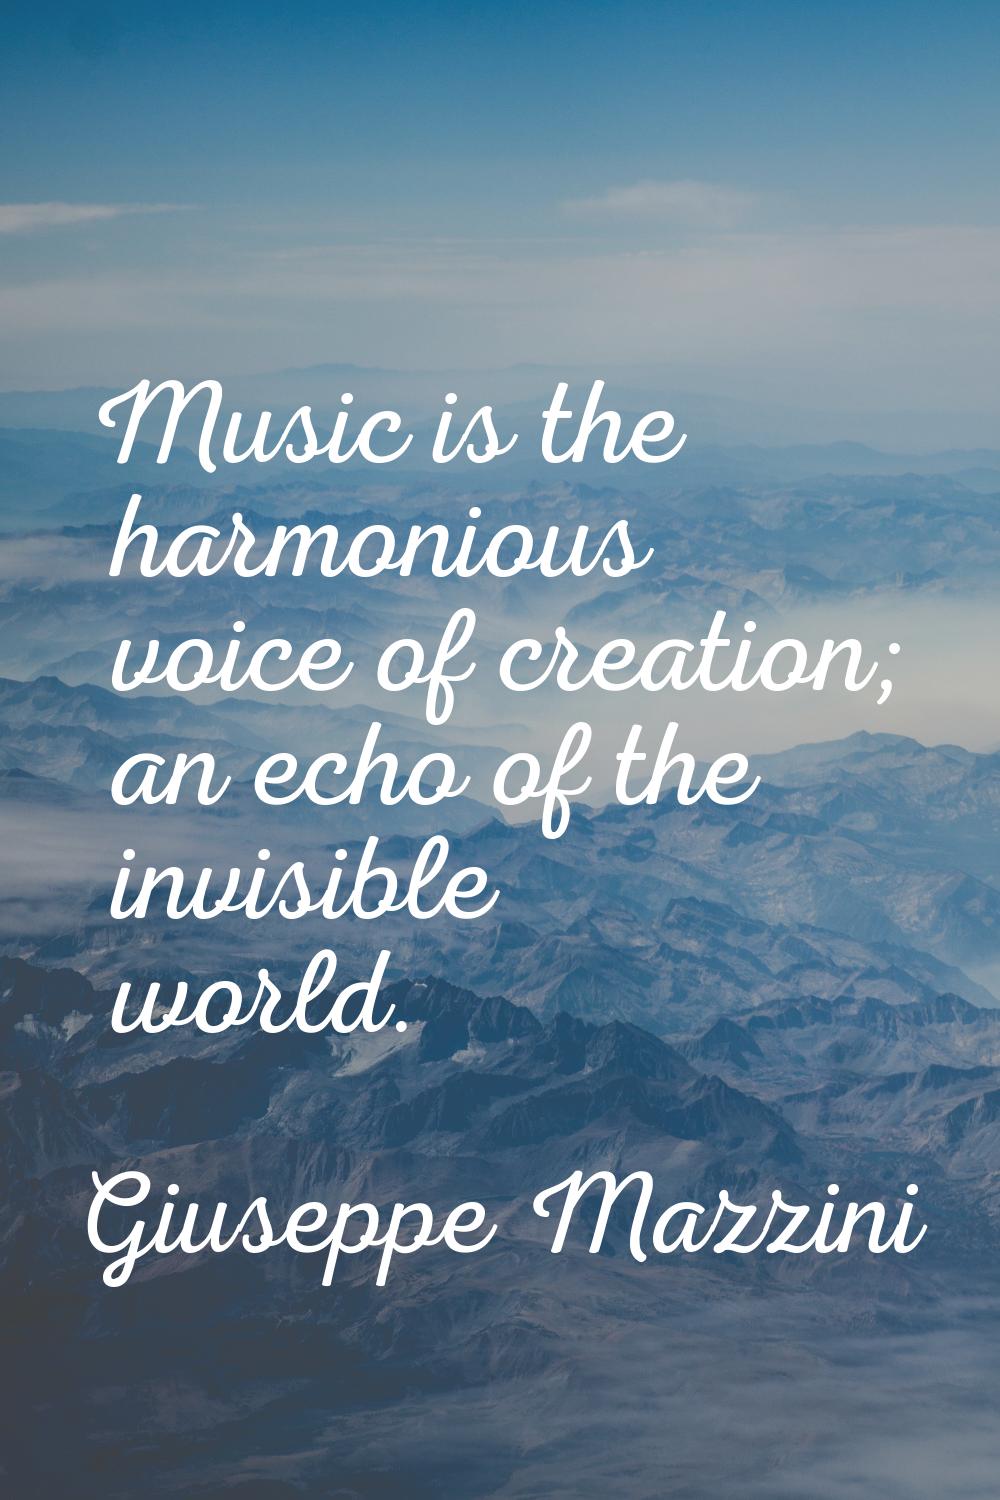 Music is the harmonious voice of creation; an echo of the invisible world.